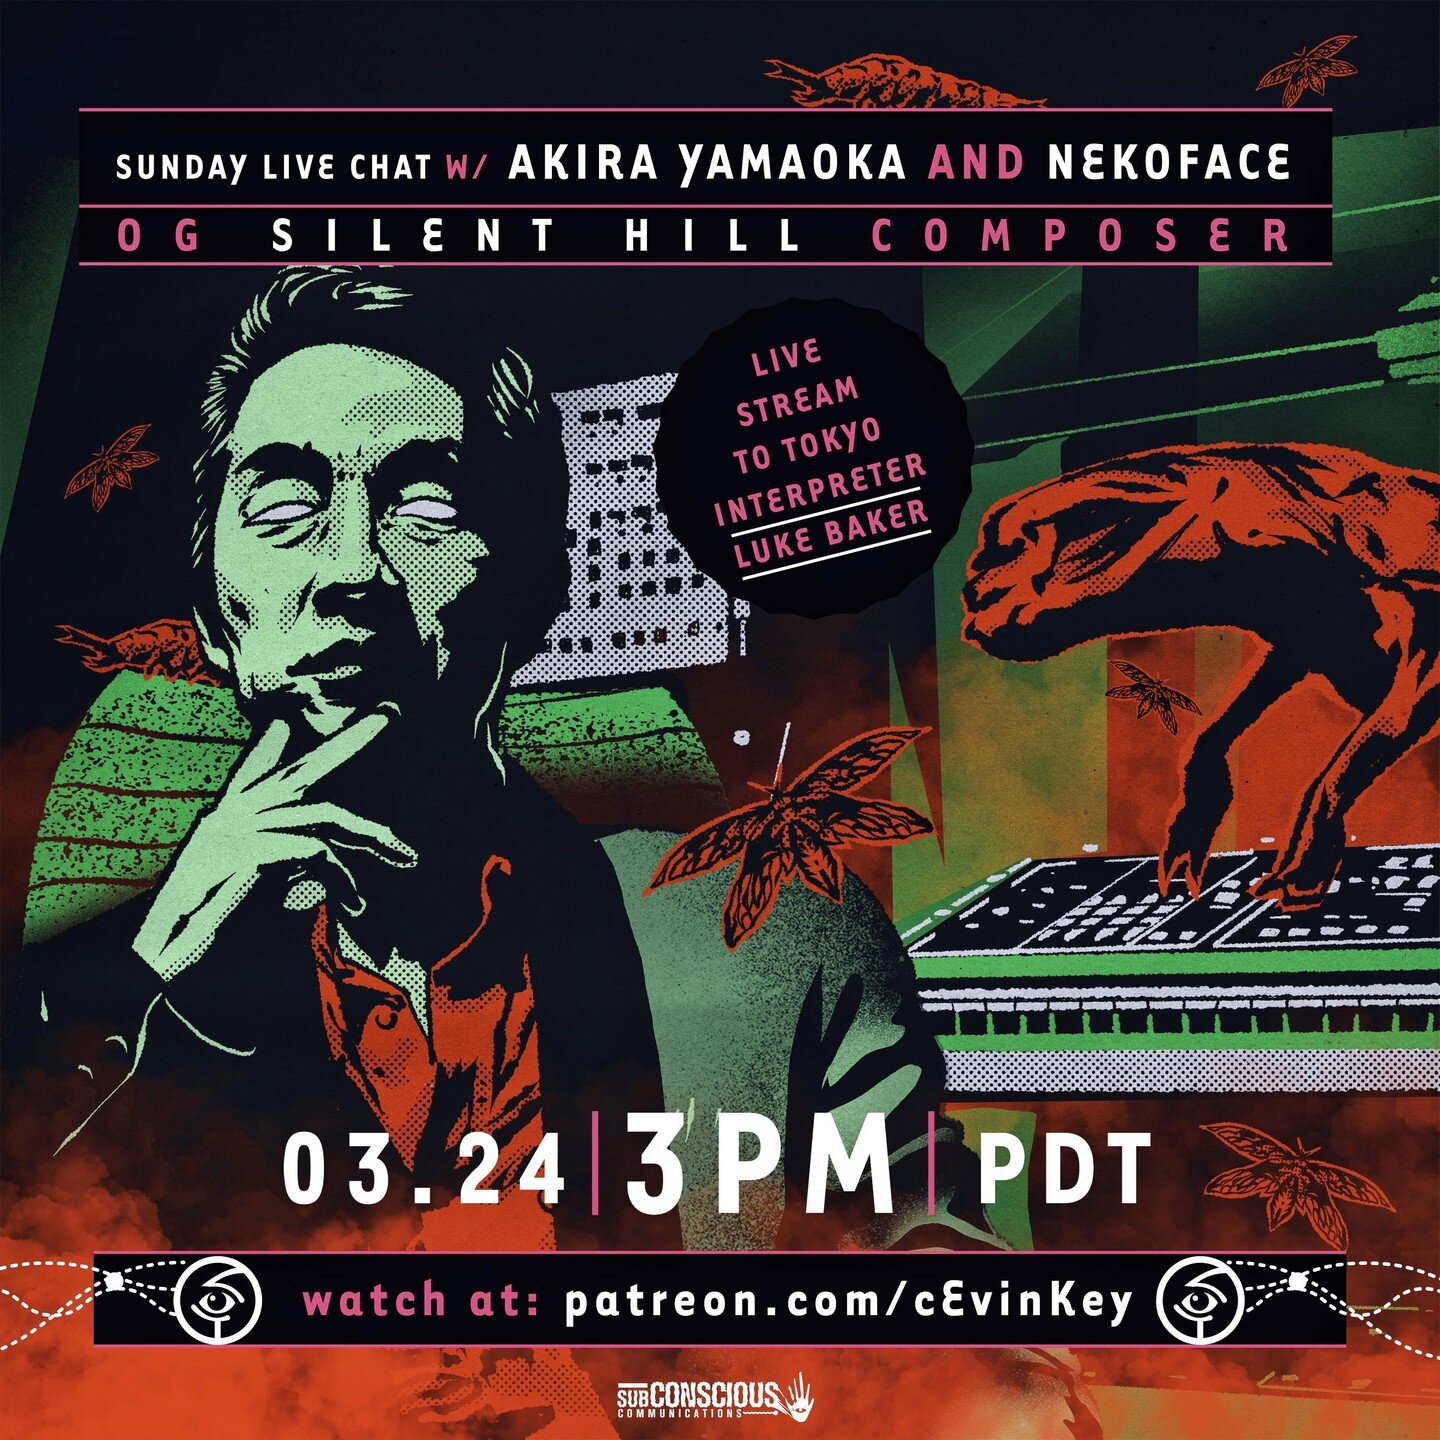 Honored to welcome the original composer for SILENT HILL , AKIRA YAMAOKA, live from Tokyo with interpreter LUKE BAKER [VICE/JAPAN TIMES]. NEKOFACE will conduct the discussion on the music and inspirations for the series. Turns out we have a circular 